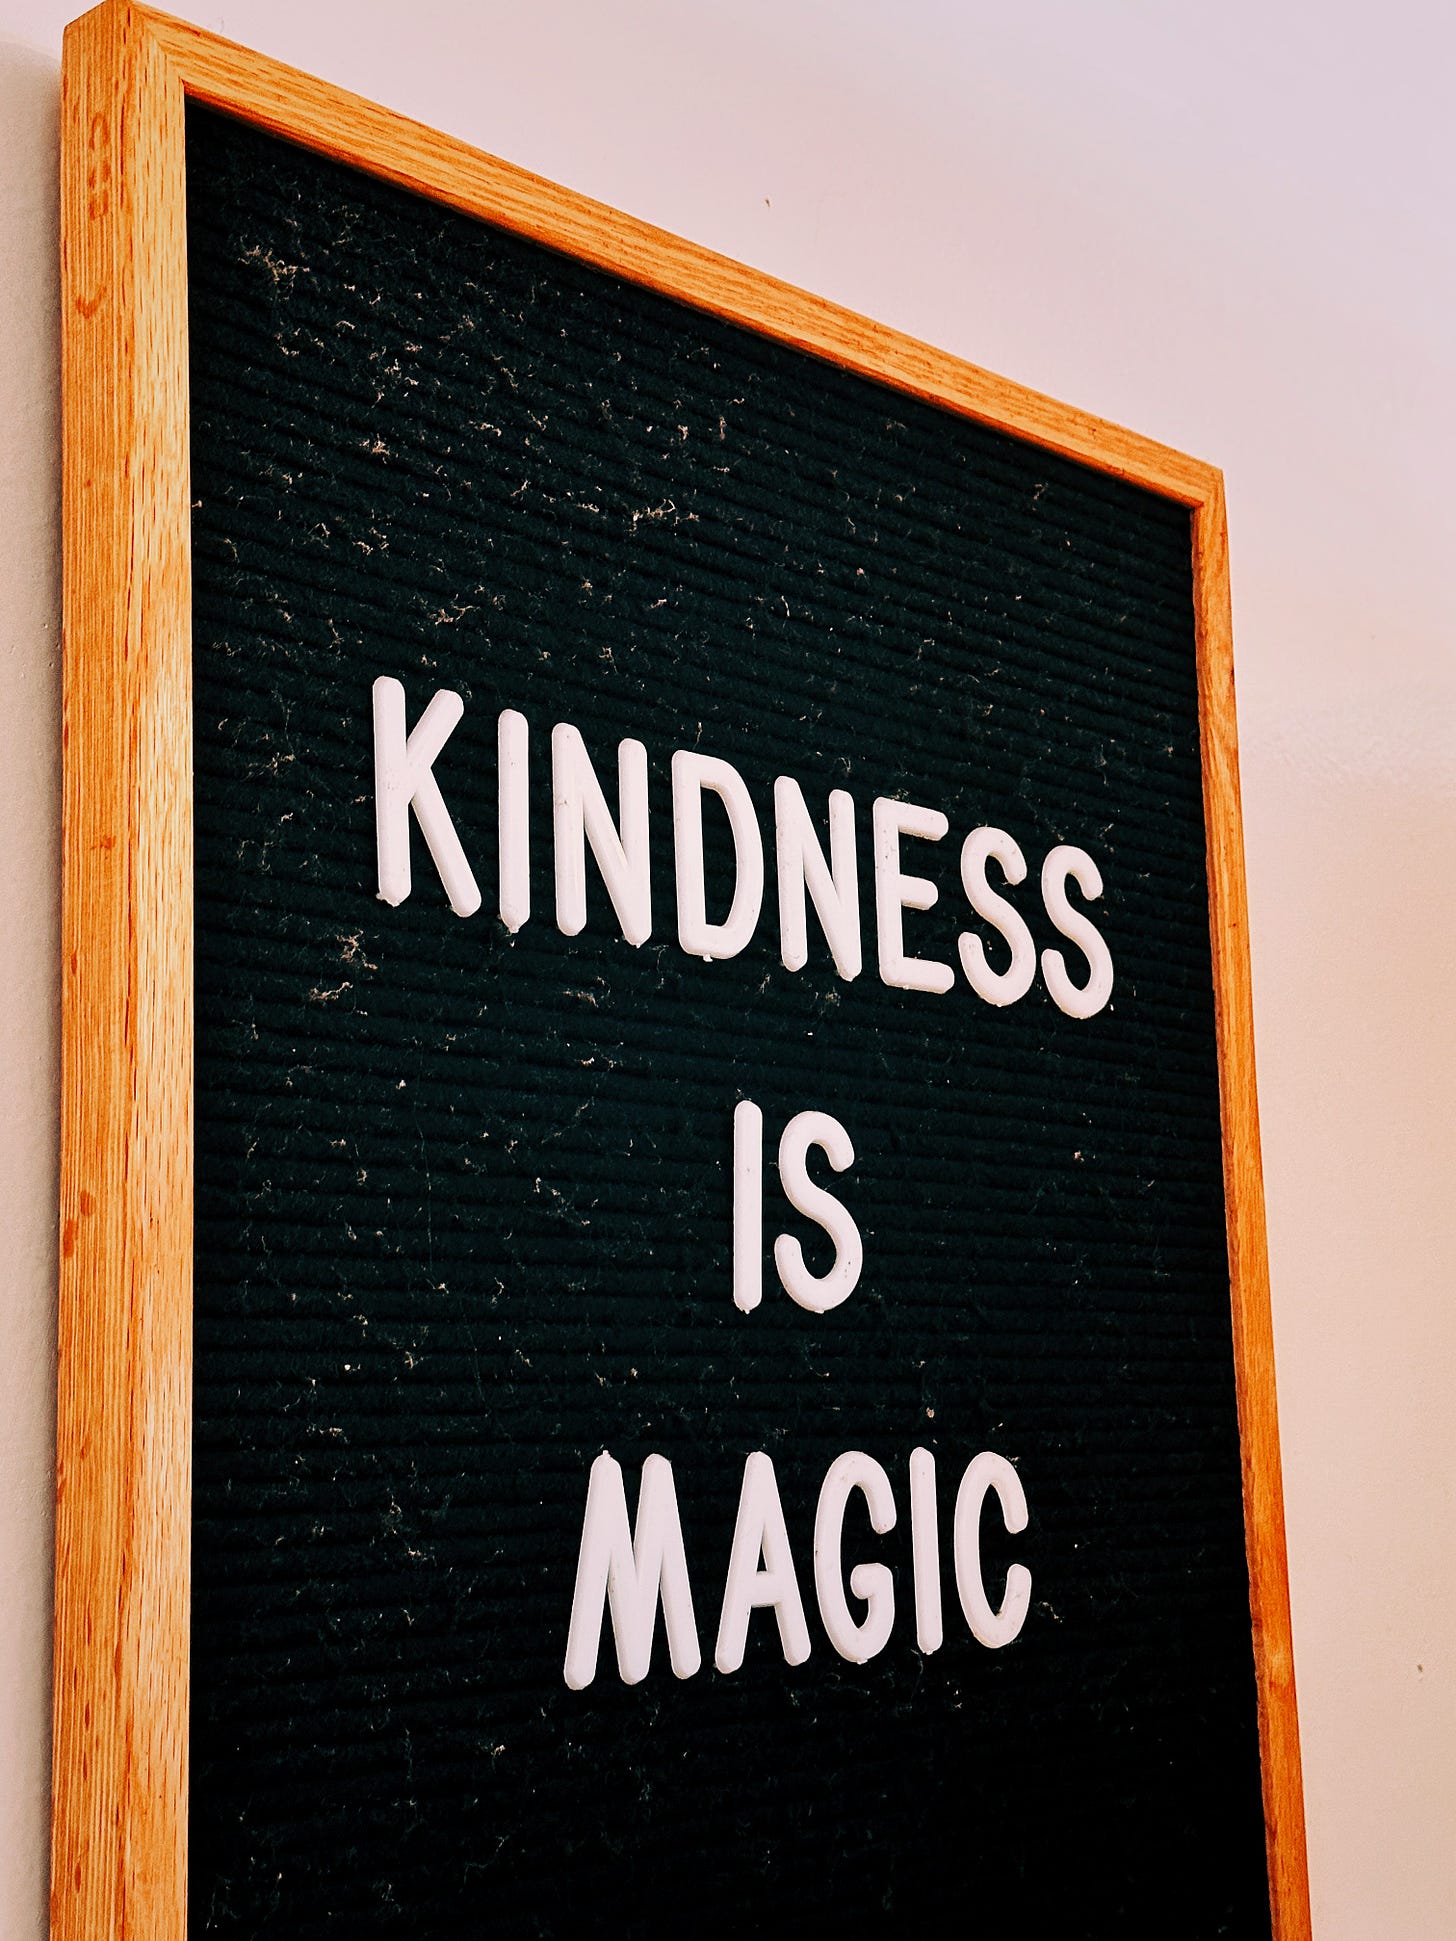 A framed message board that says "kindness is magic"